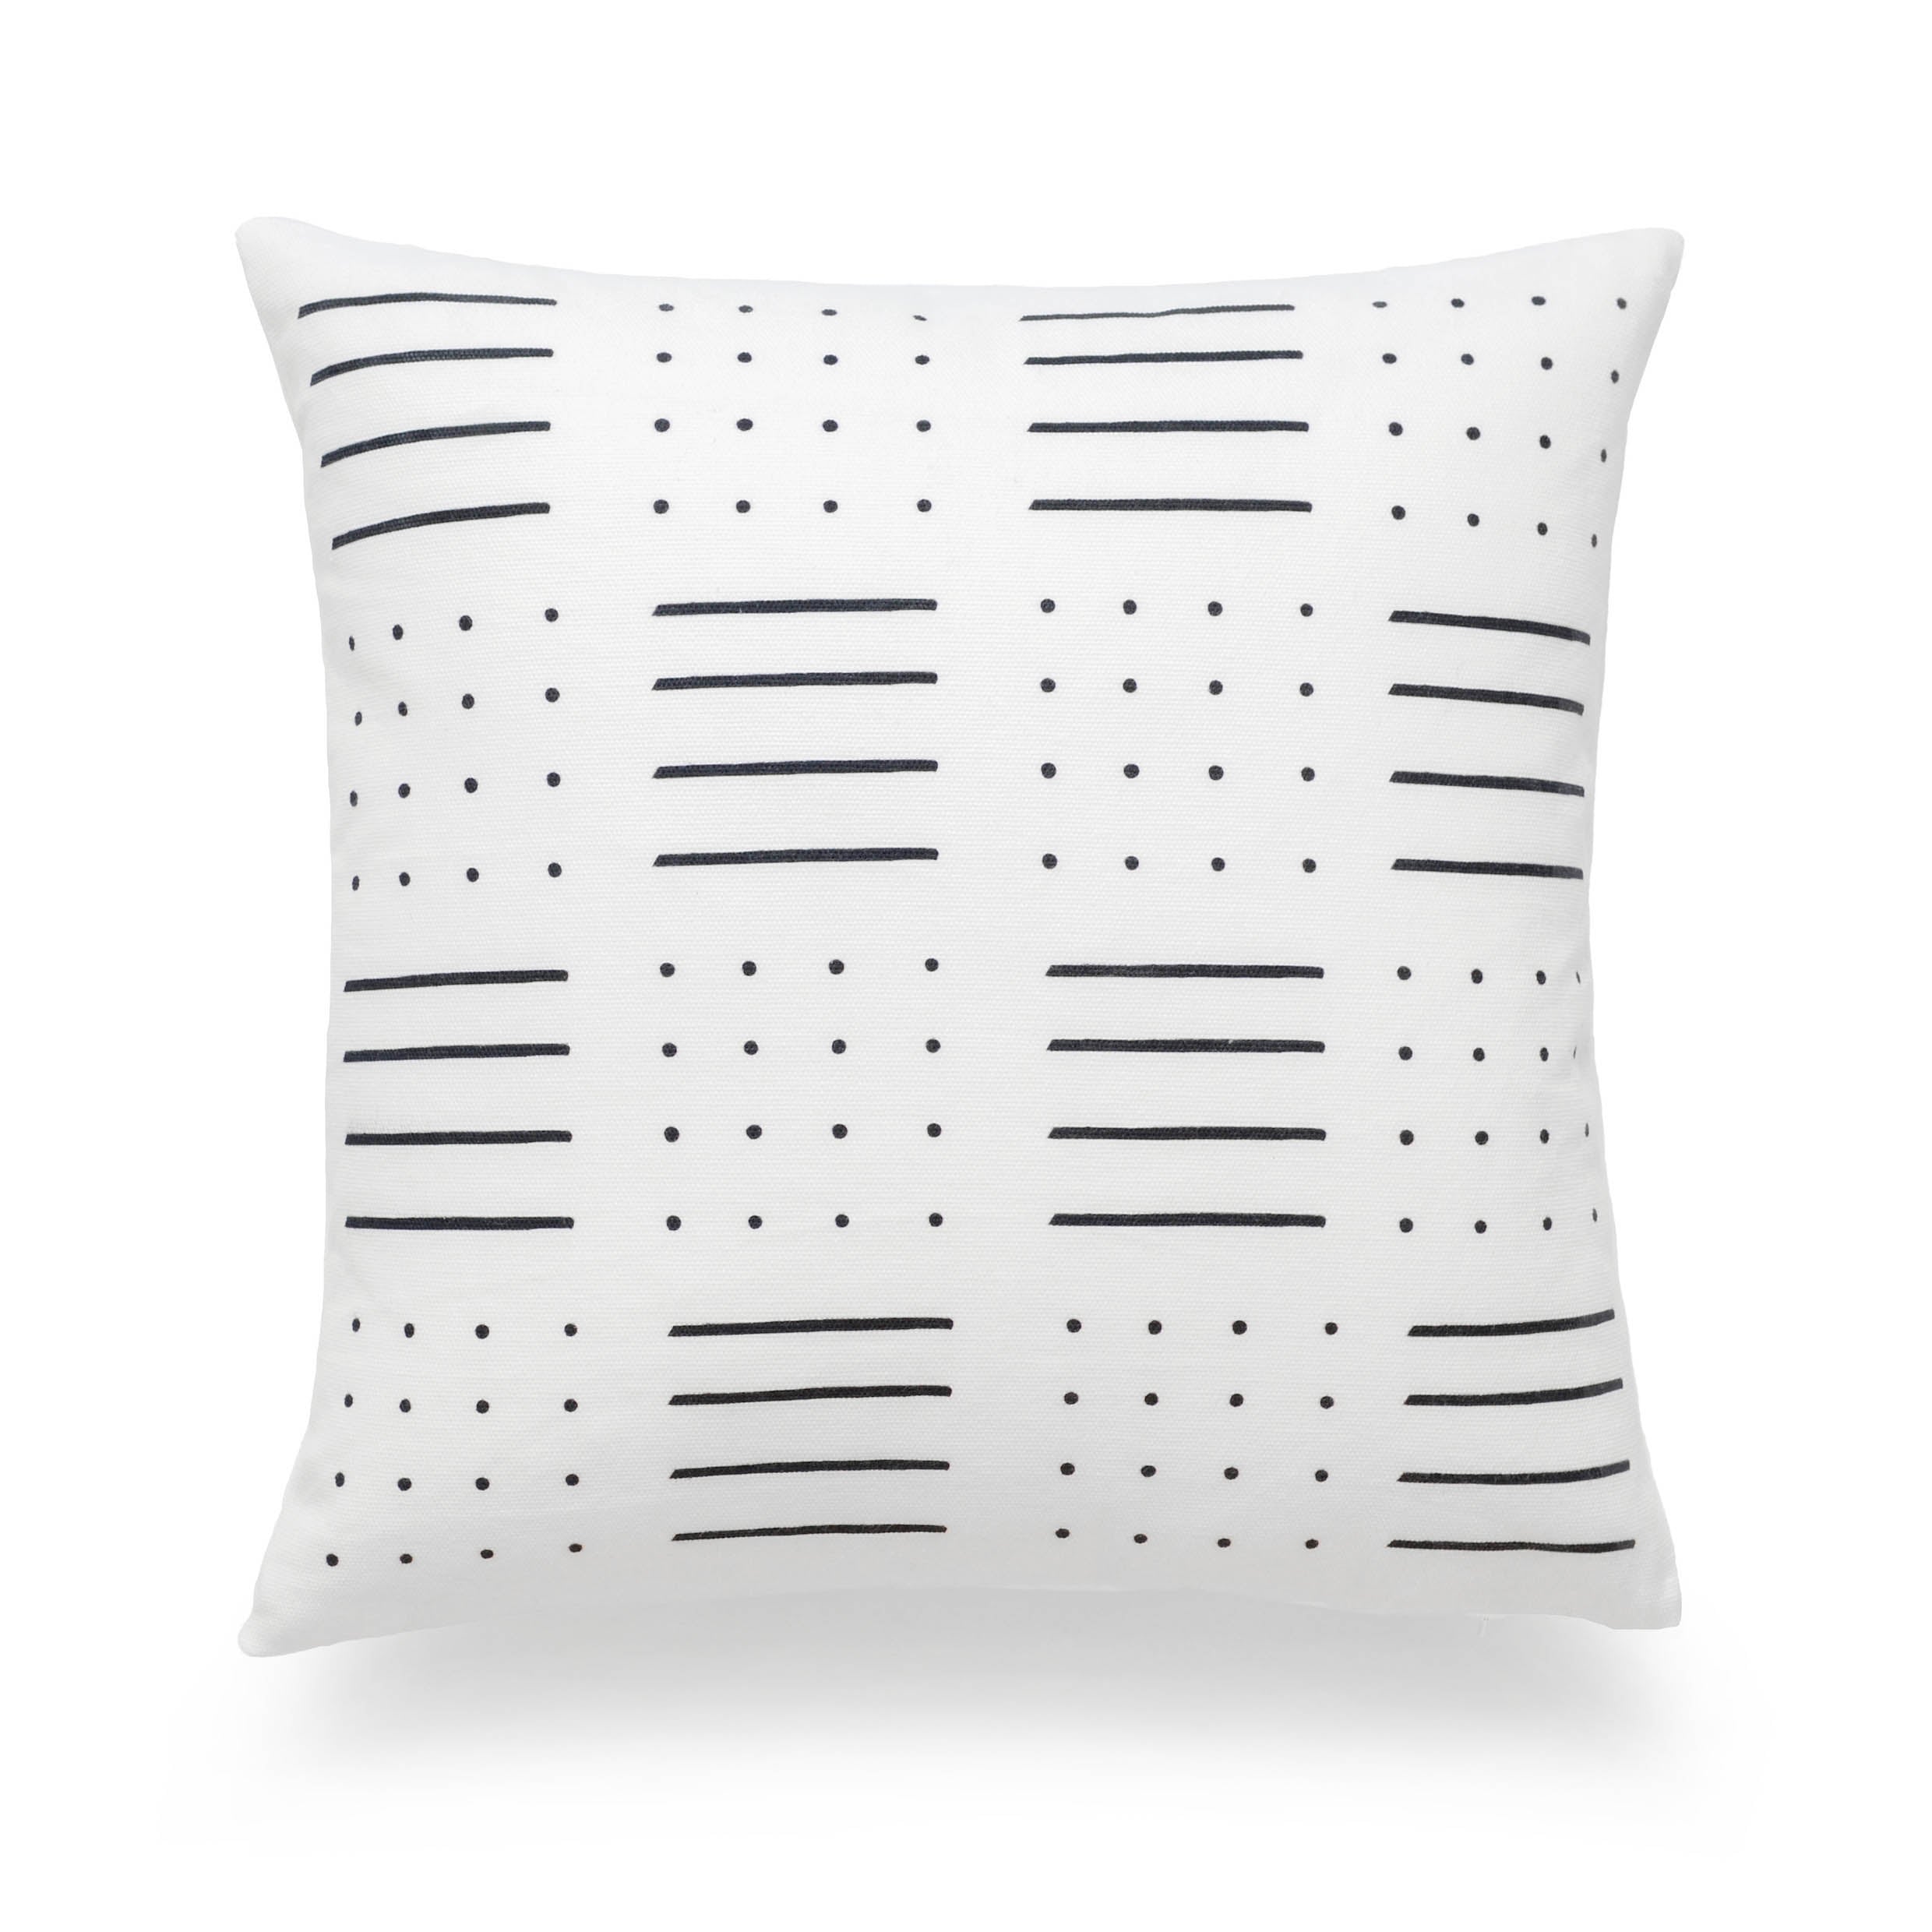 African Mud Cloth Pillow Cover, Dots And Dashes, Black And White, 18"x18"